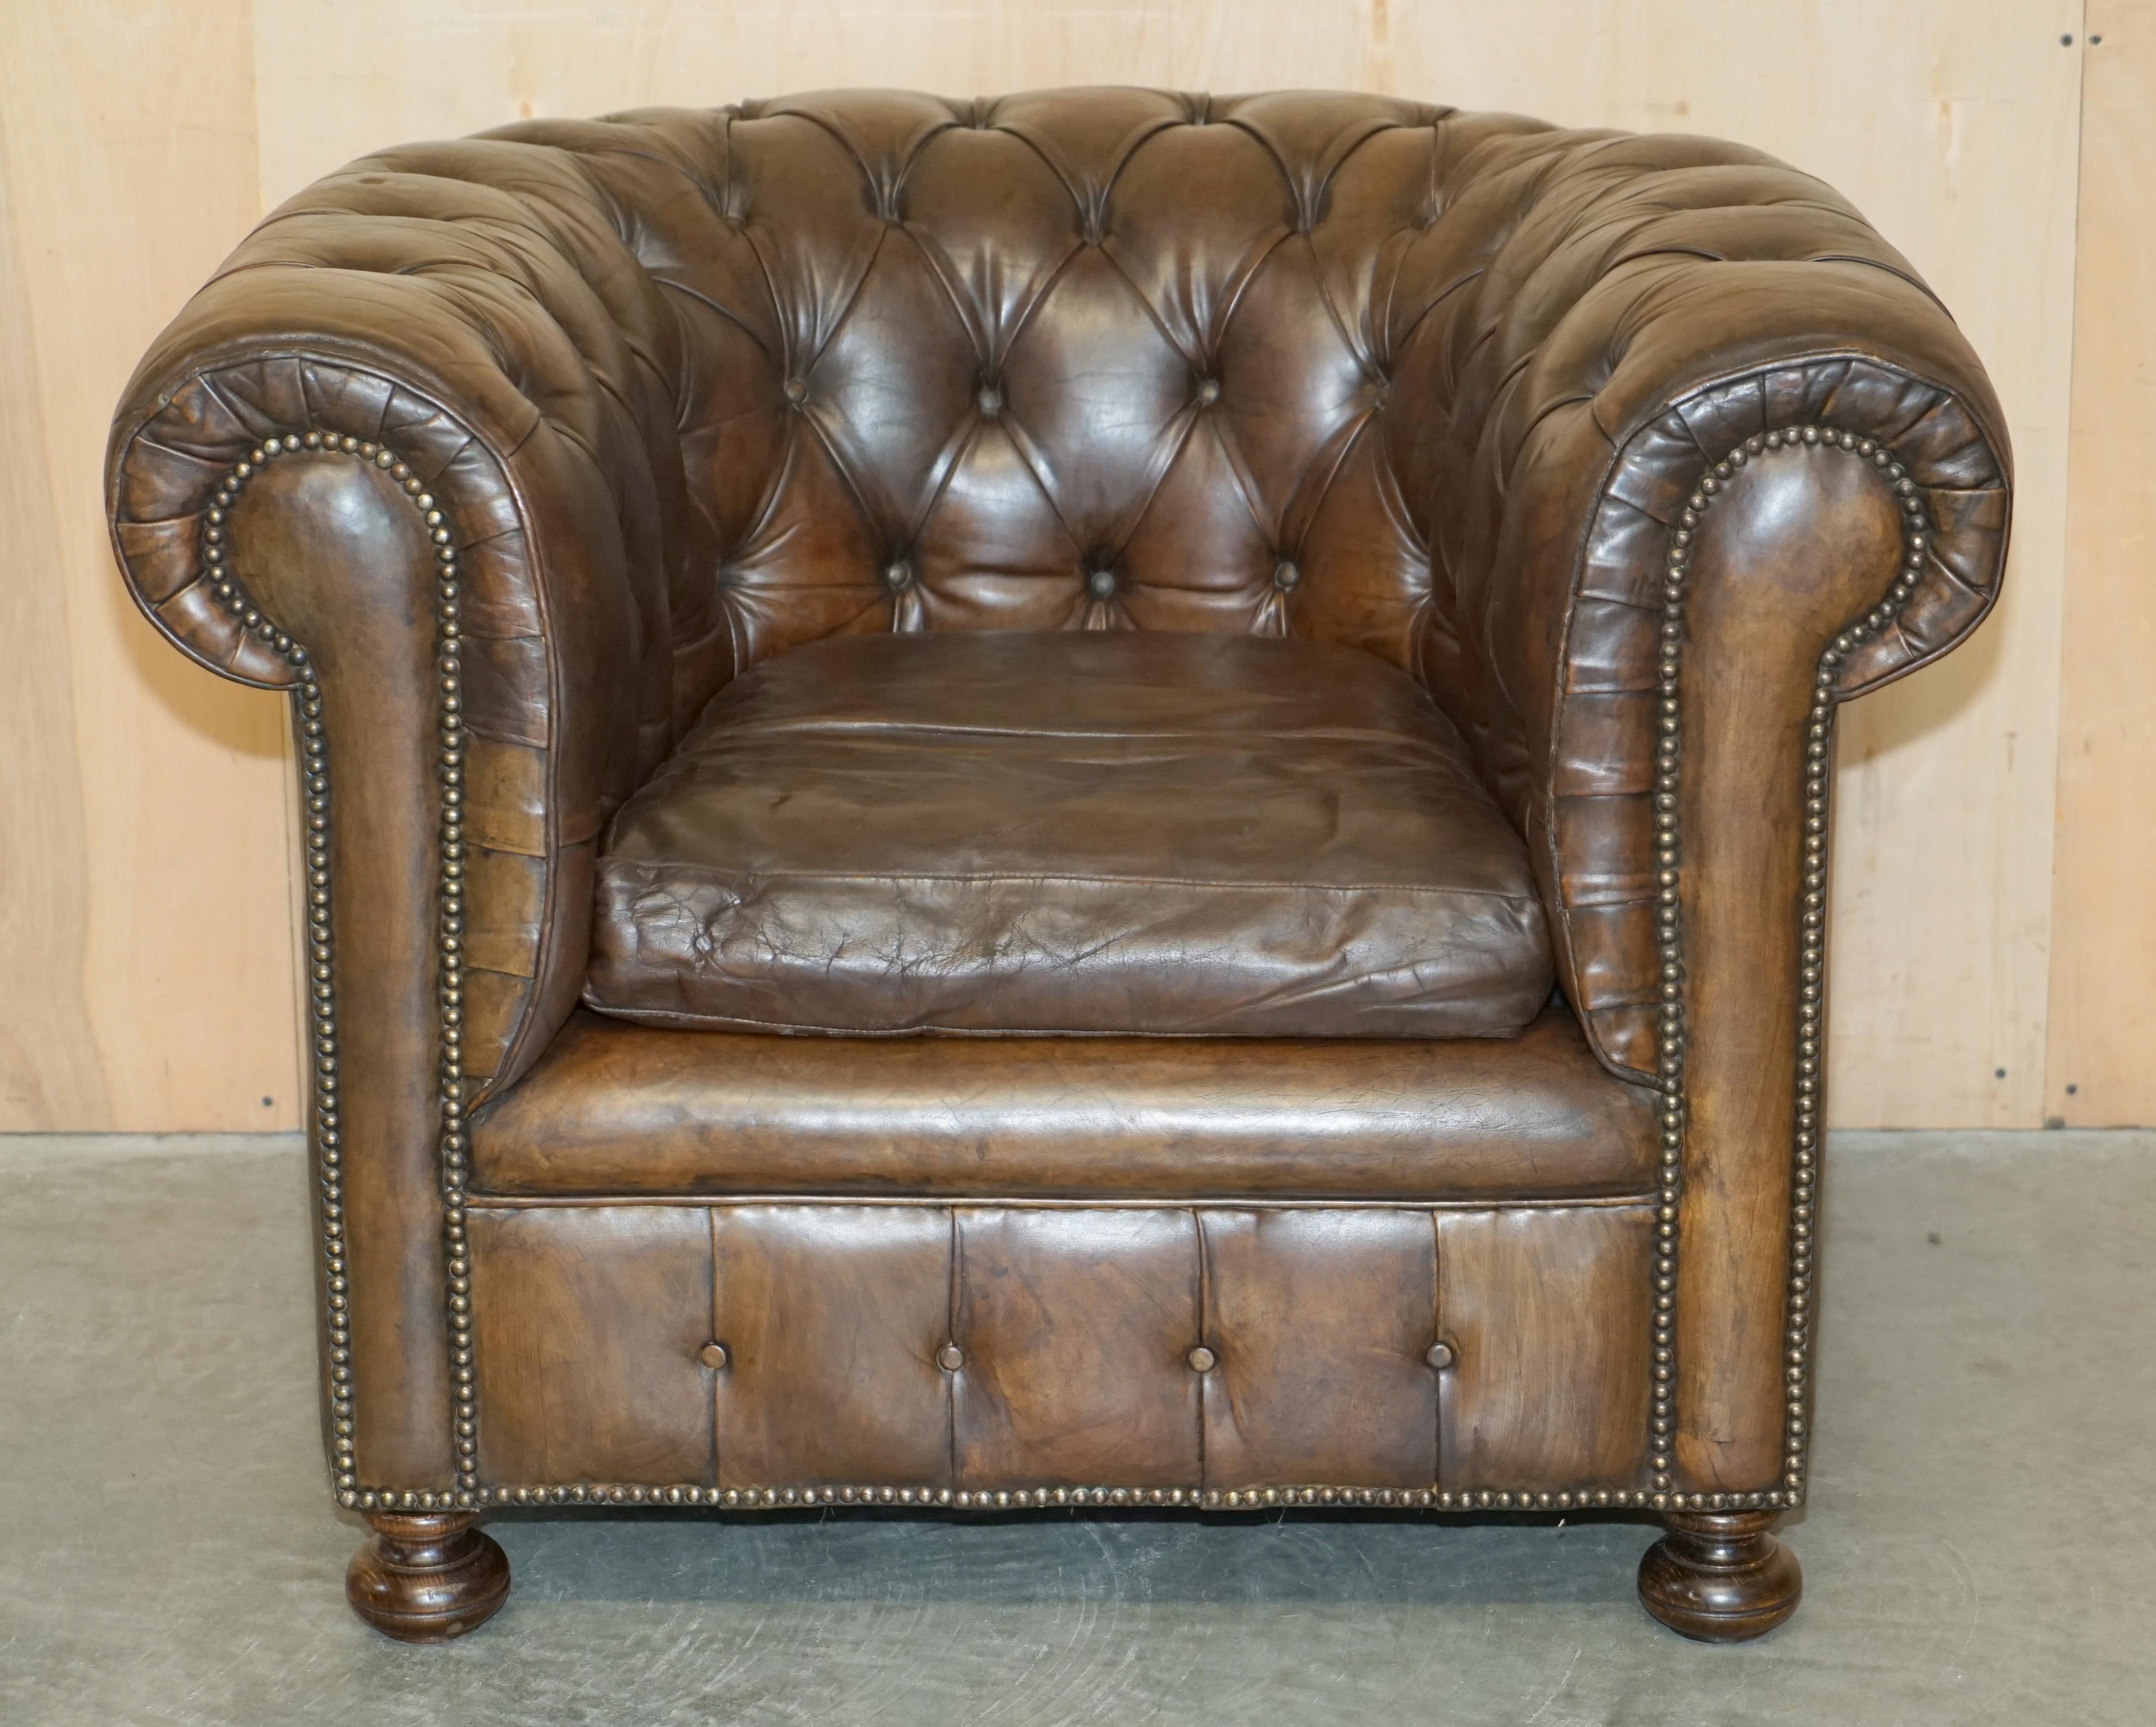 Royal House Antiques

Royal House Antiques is delighted to offer for sale this vintage circa 1950's Chesterfield club armchair with coil sprung seat platform and hand turned Walnut bun feet

Please note the delivery fee listed is just a guide, it